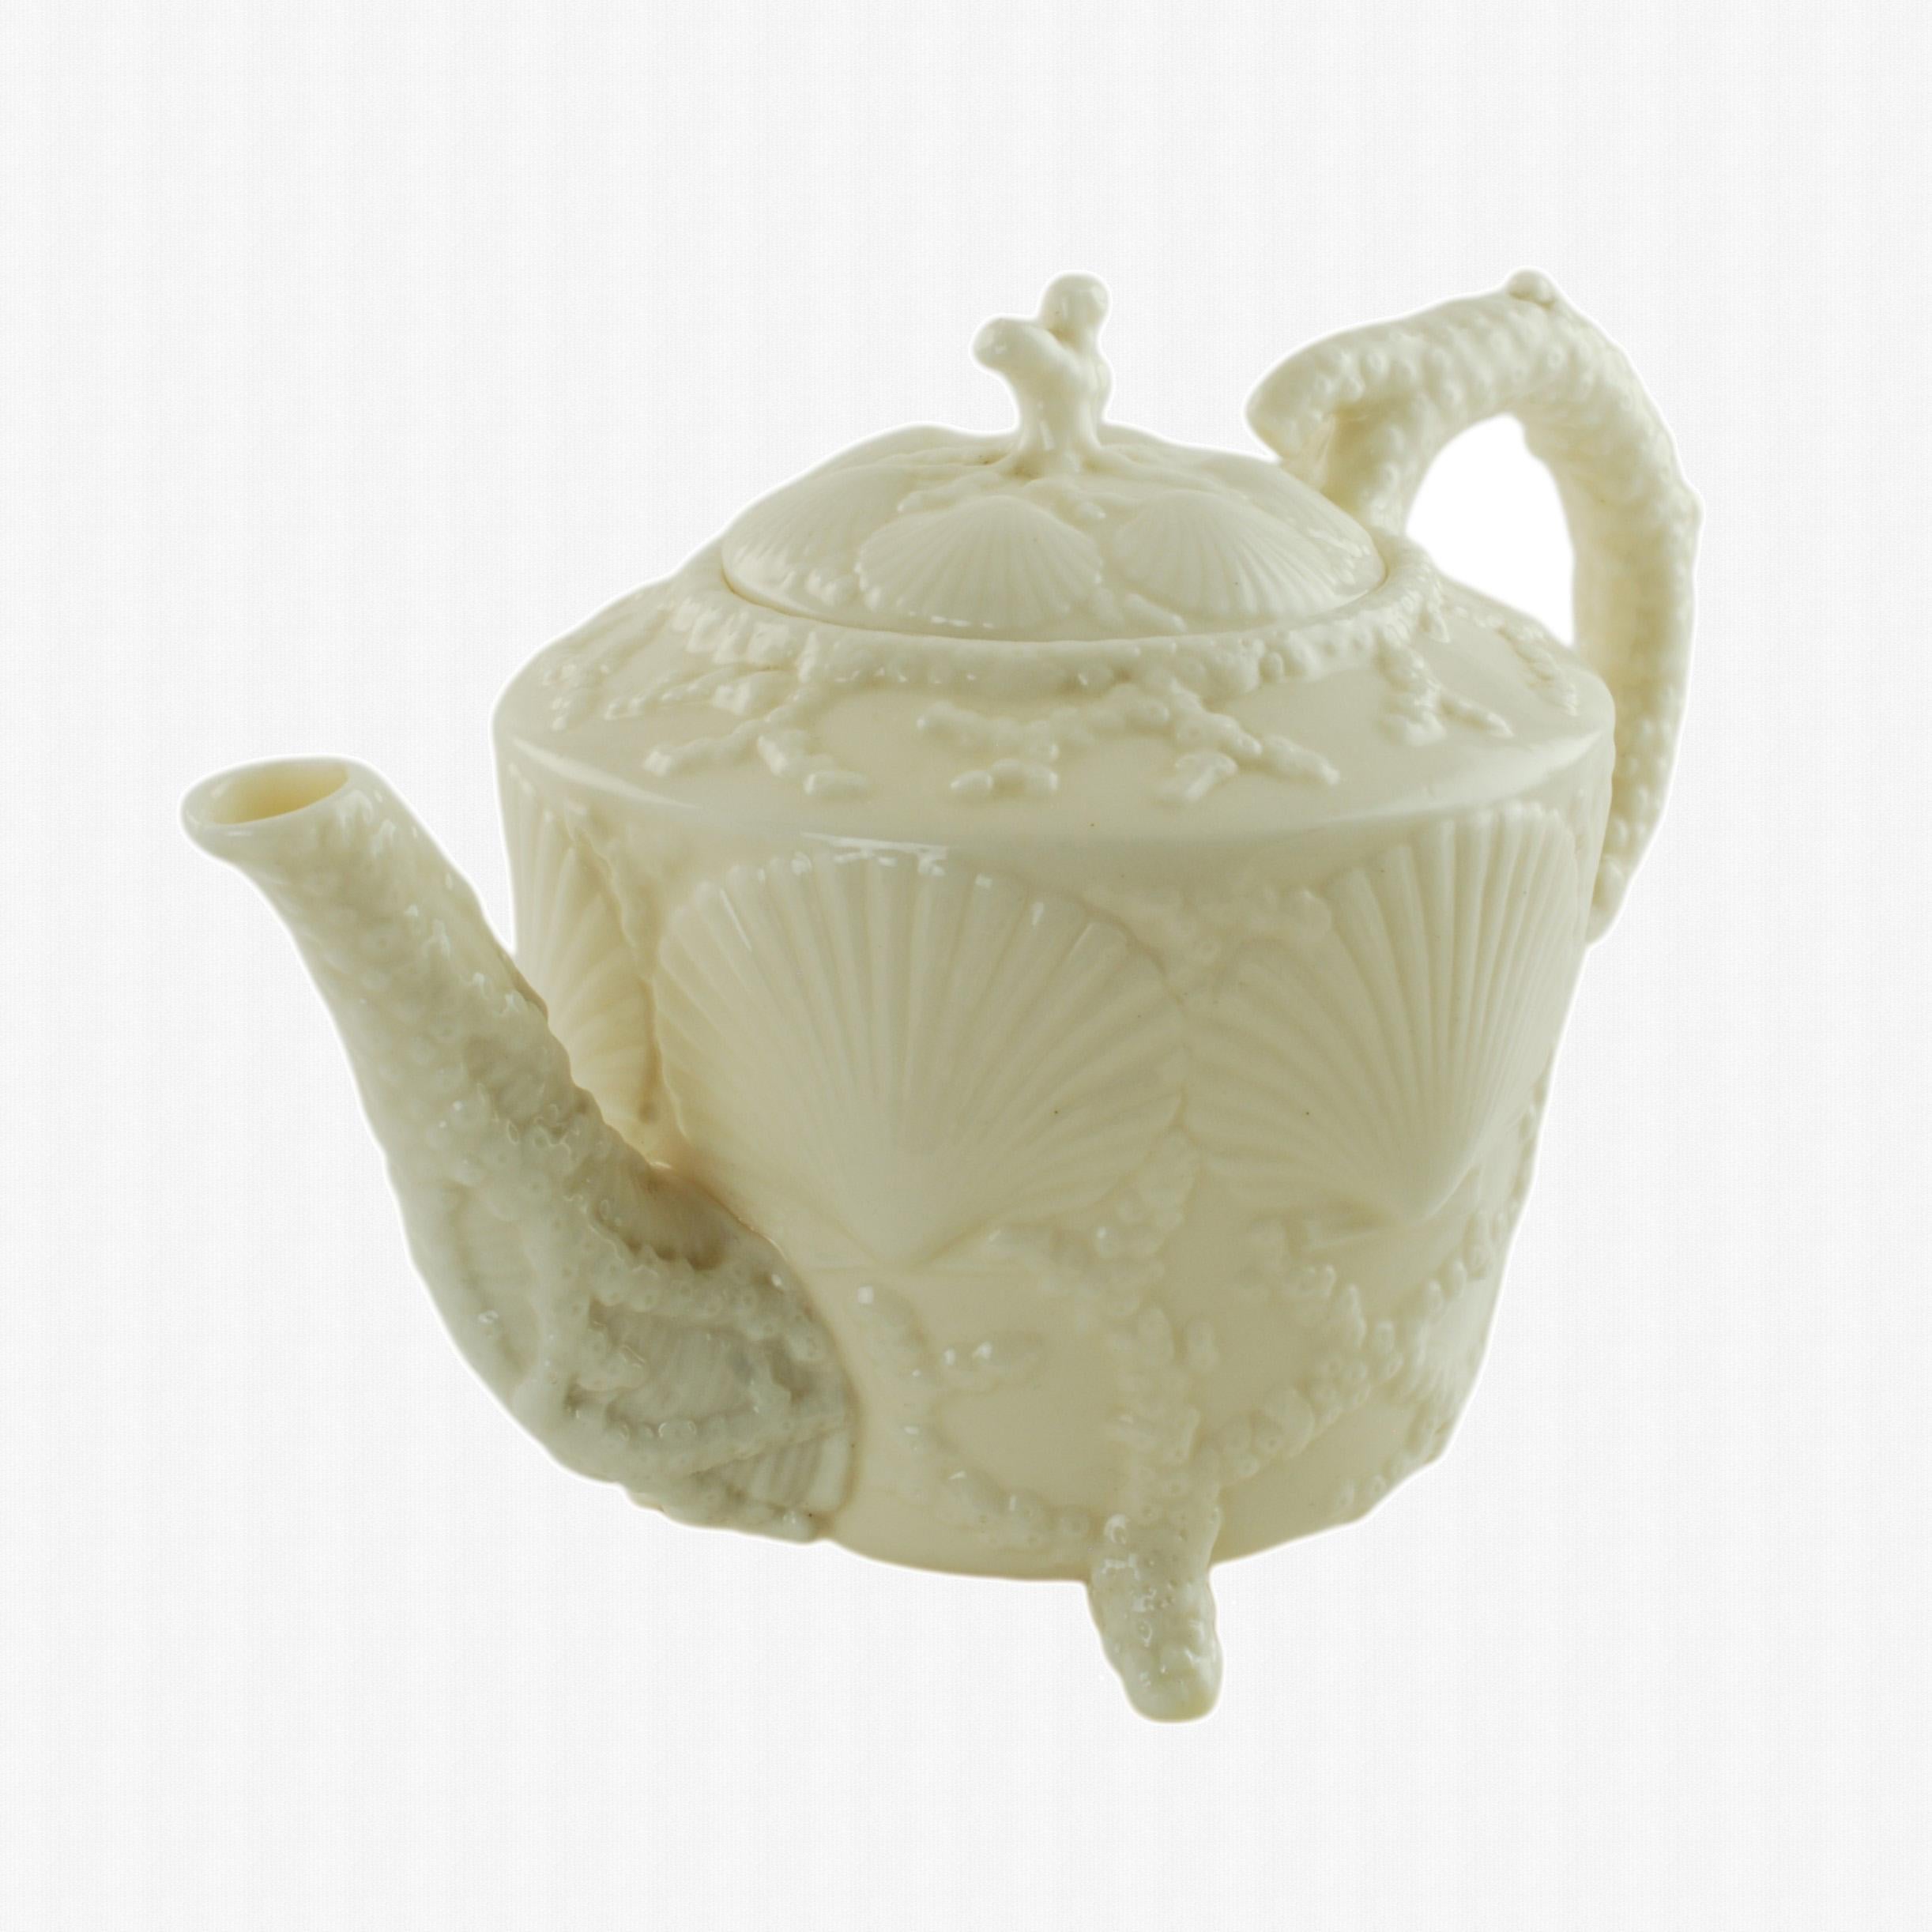 This rare late 19th century footed porcelain teapot was made by Belleek of Ireland in the shell pattern. The lid and body of the piece feature a series of moulded relief scallop shells along with coral detail. The teapot's coral elements form its